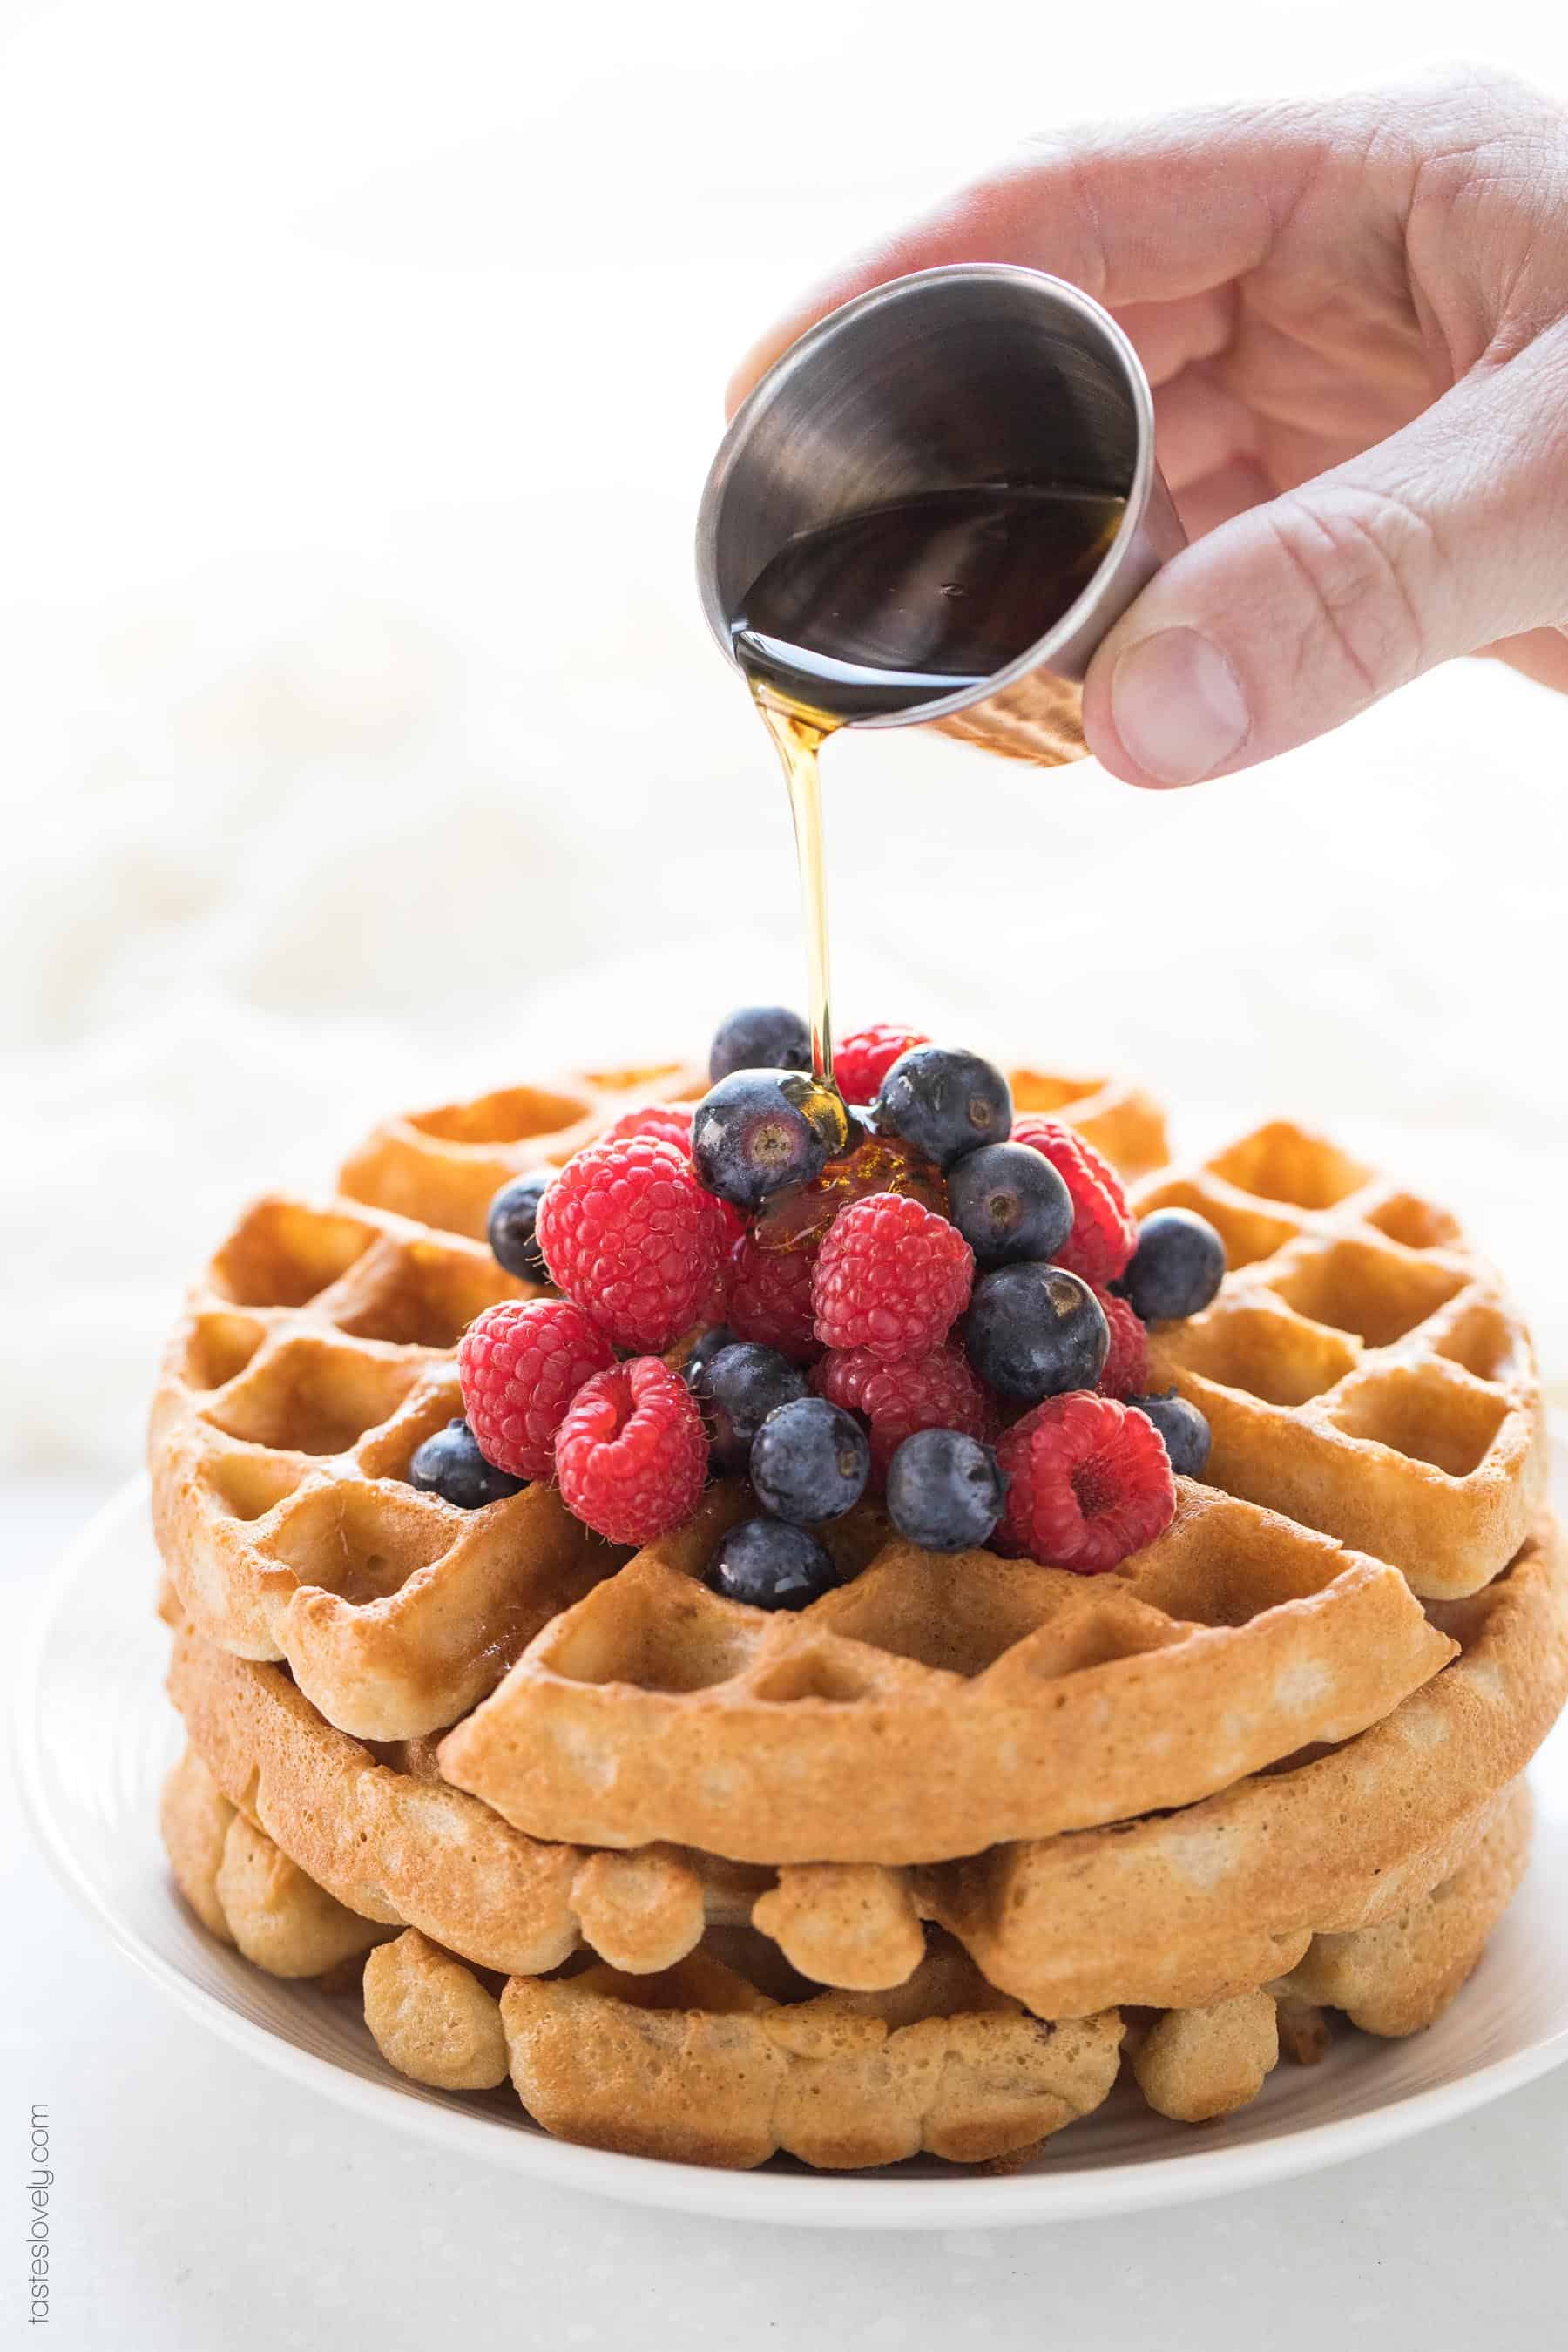 Crispy Paleo Waffles - the most delicious and crispy waffle recipe ever! You'd never guess these were paleo, gluten free, dairy free and refined sugar free!